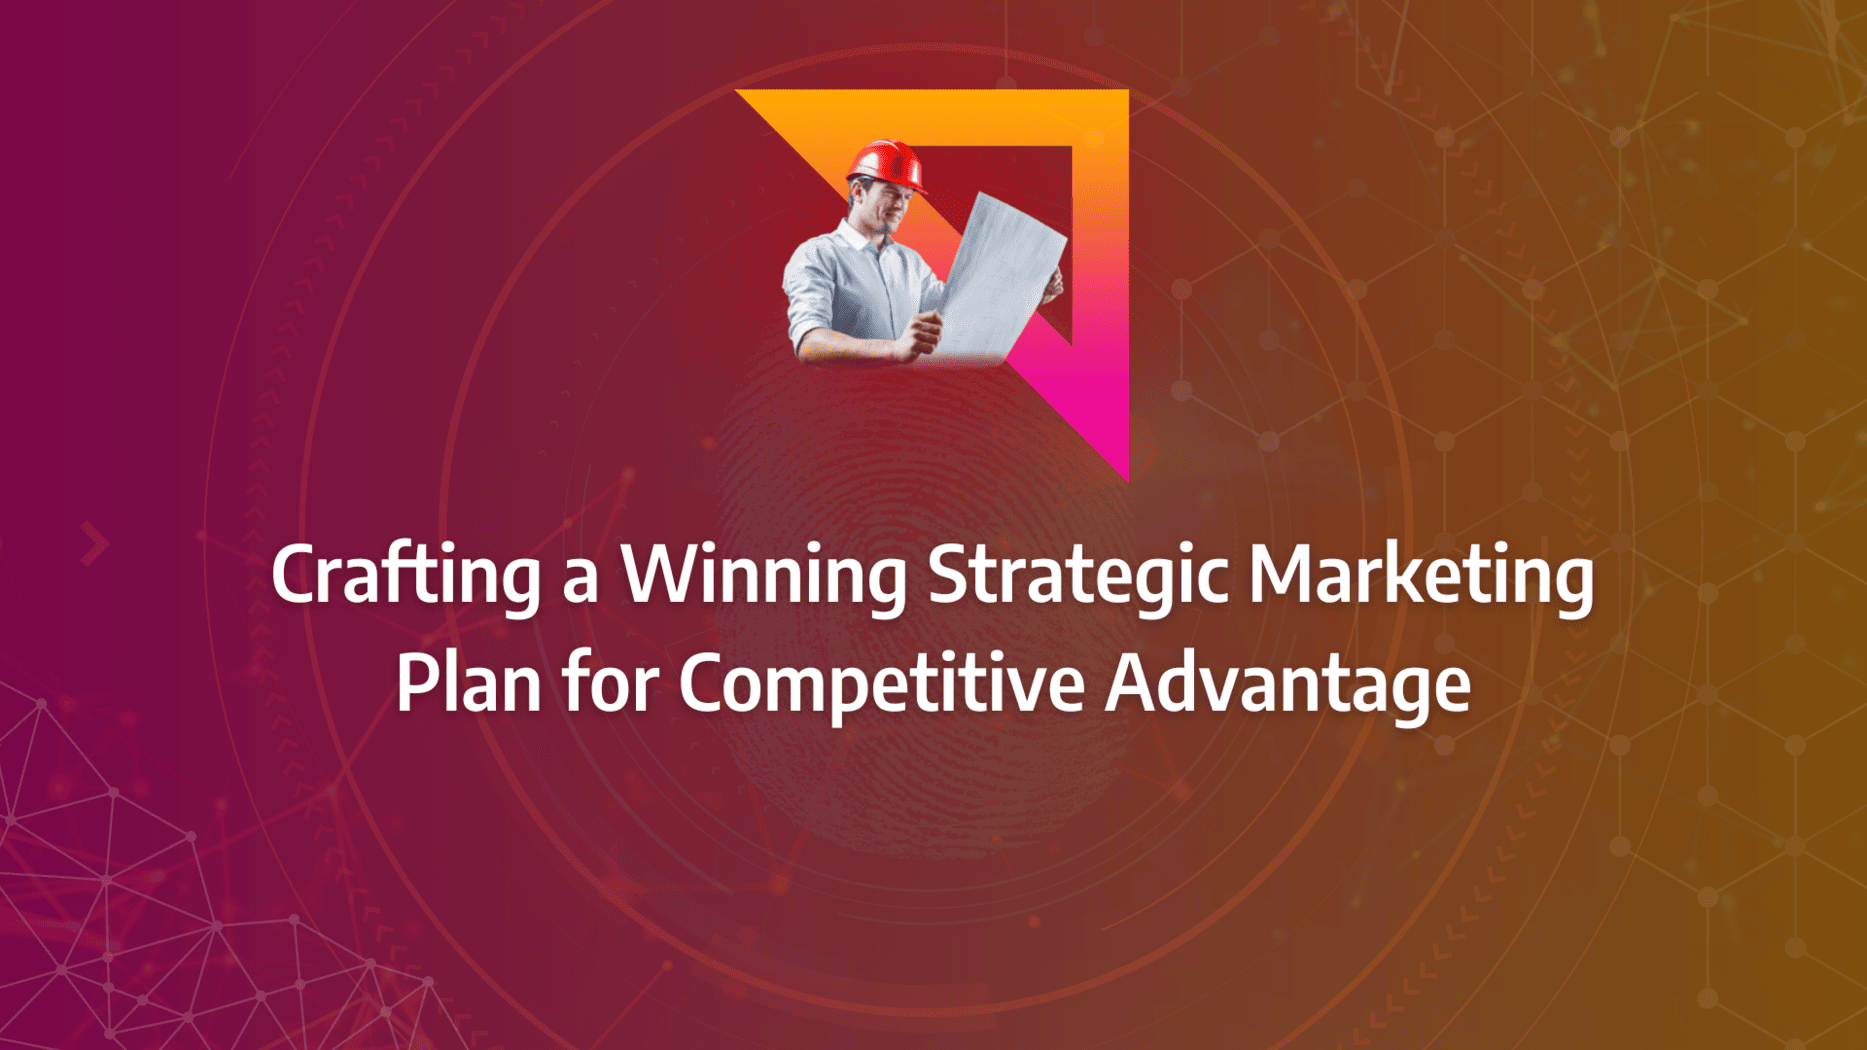 Tactics for Developing a Complete Strategic Marketing Plan for Outperforming Competitors and Increasing Campaign Performance: strategy framework diagram for strategic marketing plan, marketing plan steps, how to make a marketing plan, strategic group map, strategic competitiveness